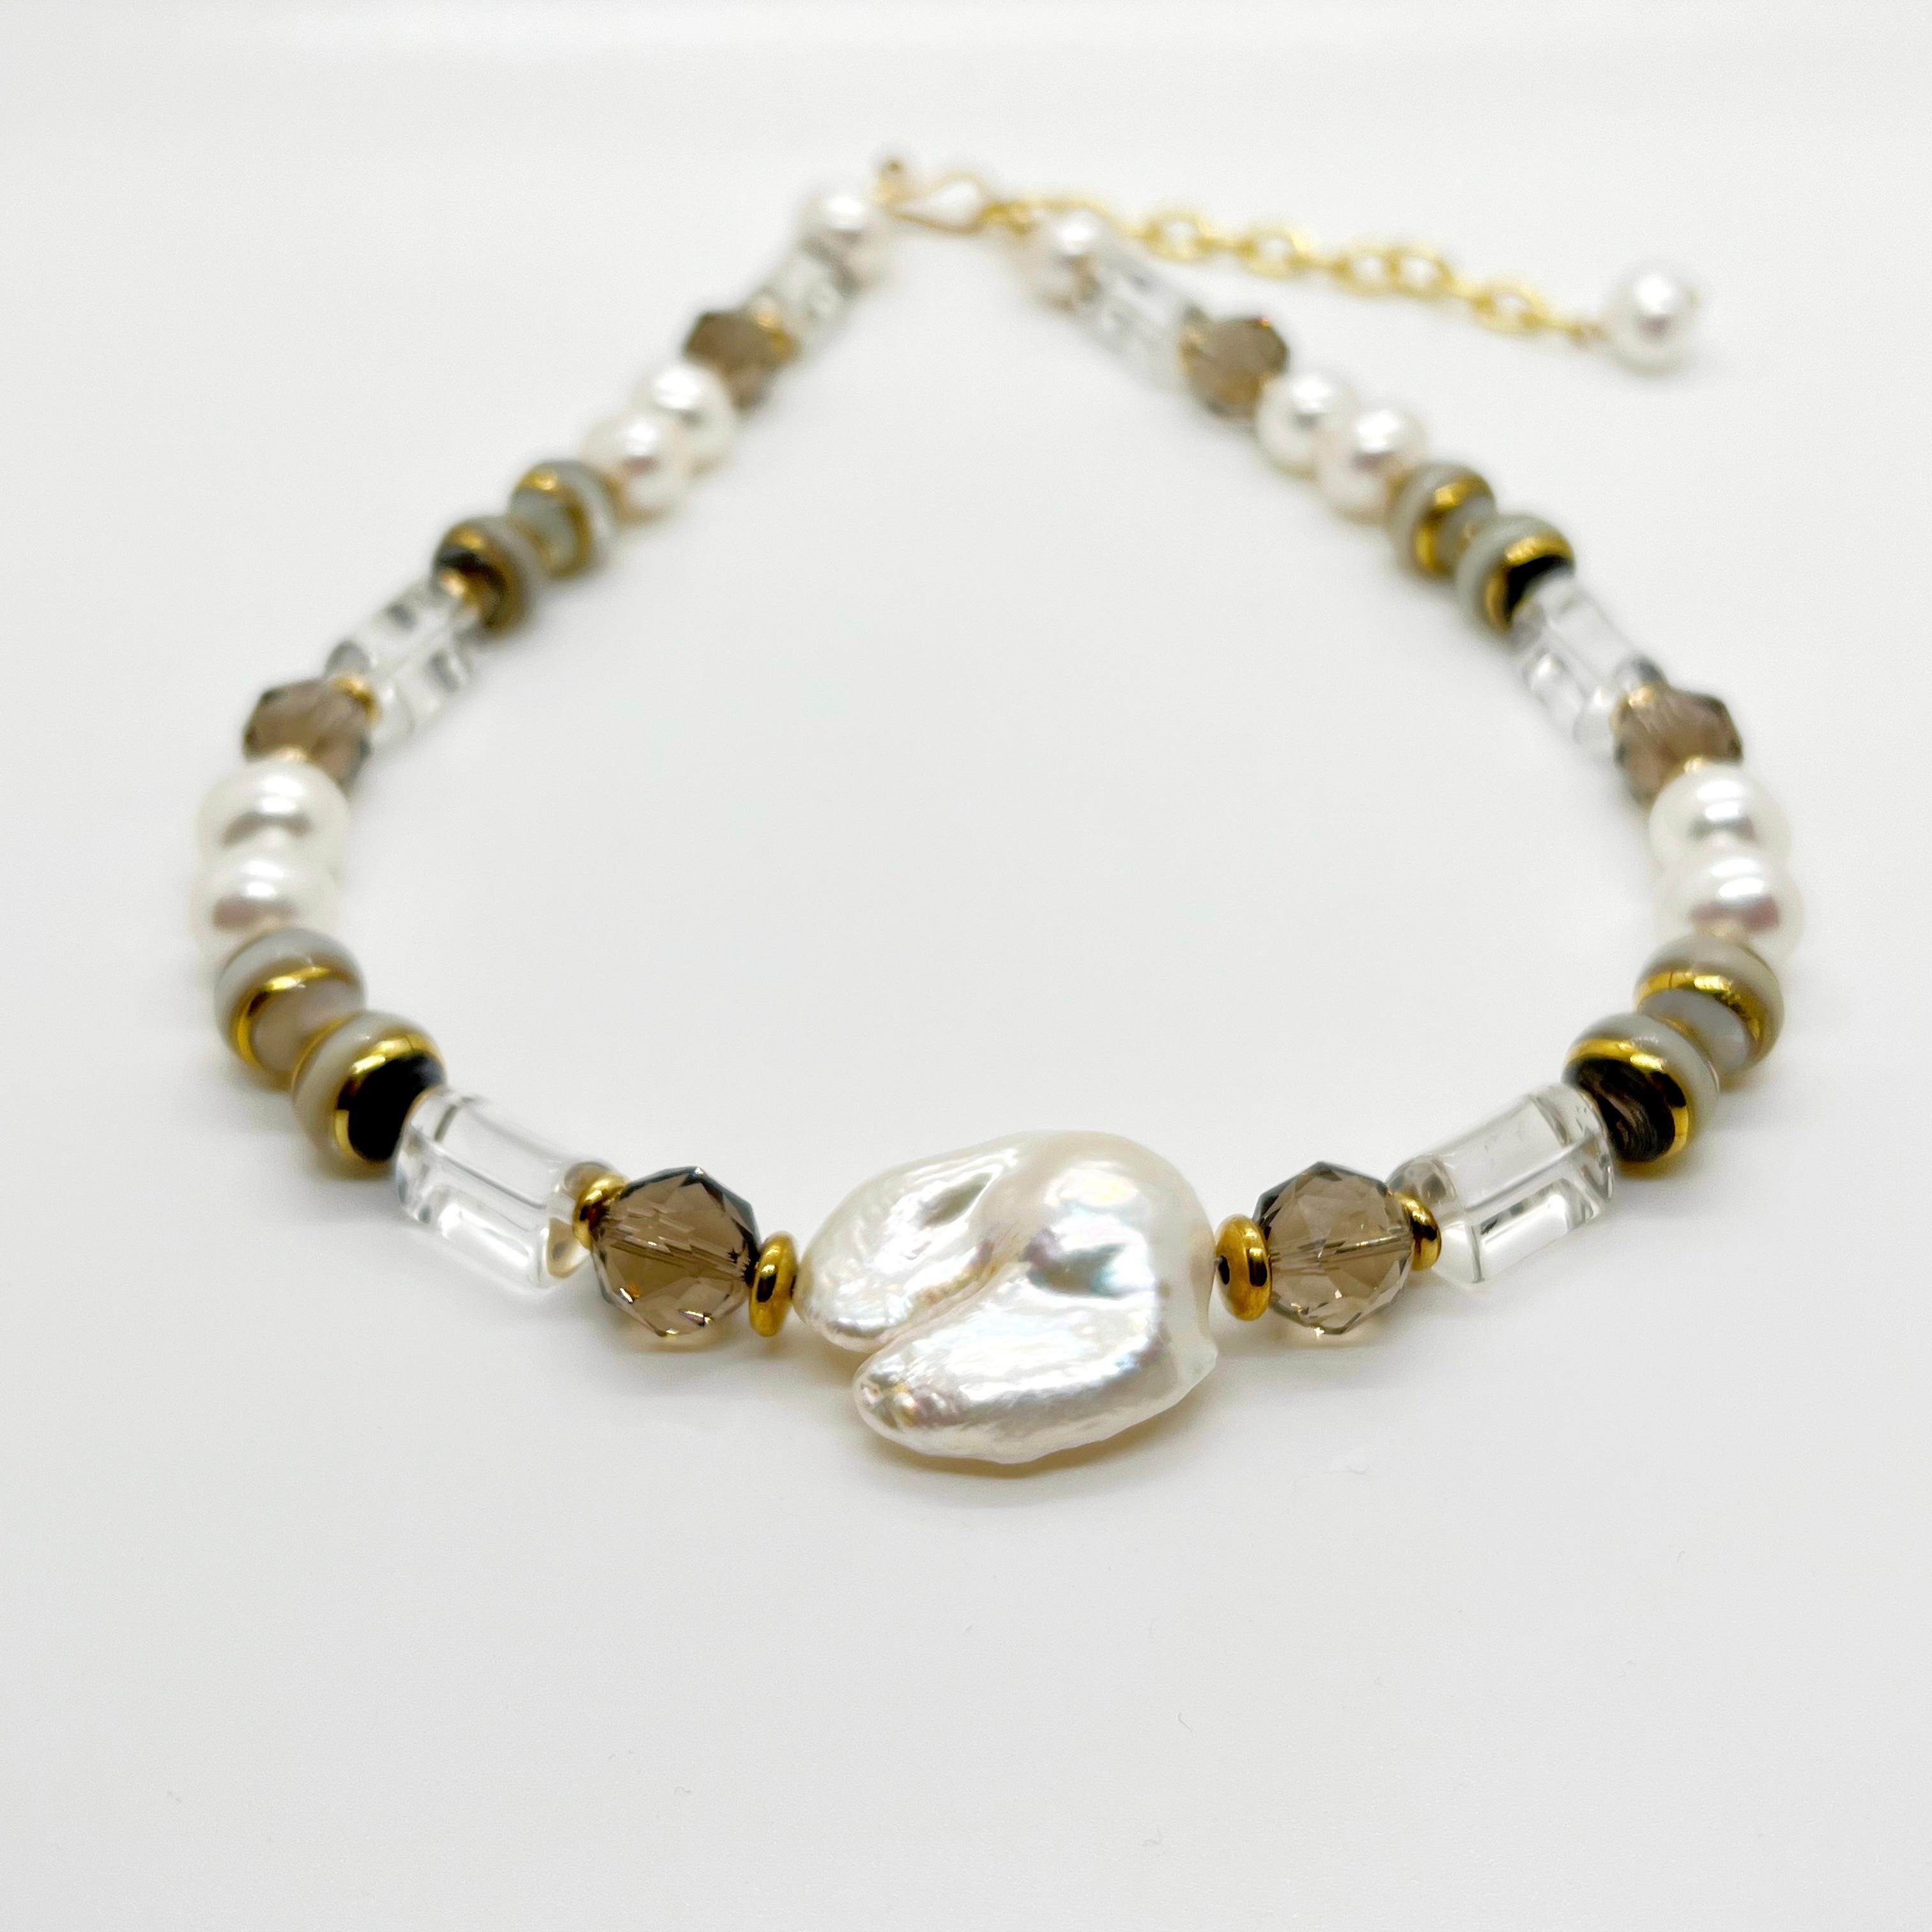 The Collette necklace is a medley of clear and smokey quartz, with freshwater pearls and artisan made banded beads that are made from mother of pearl and abalone shells. This necklace is 18 inches and can be extended up to 20 inches.

Please note